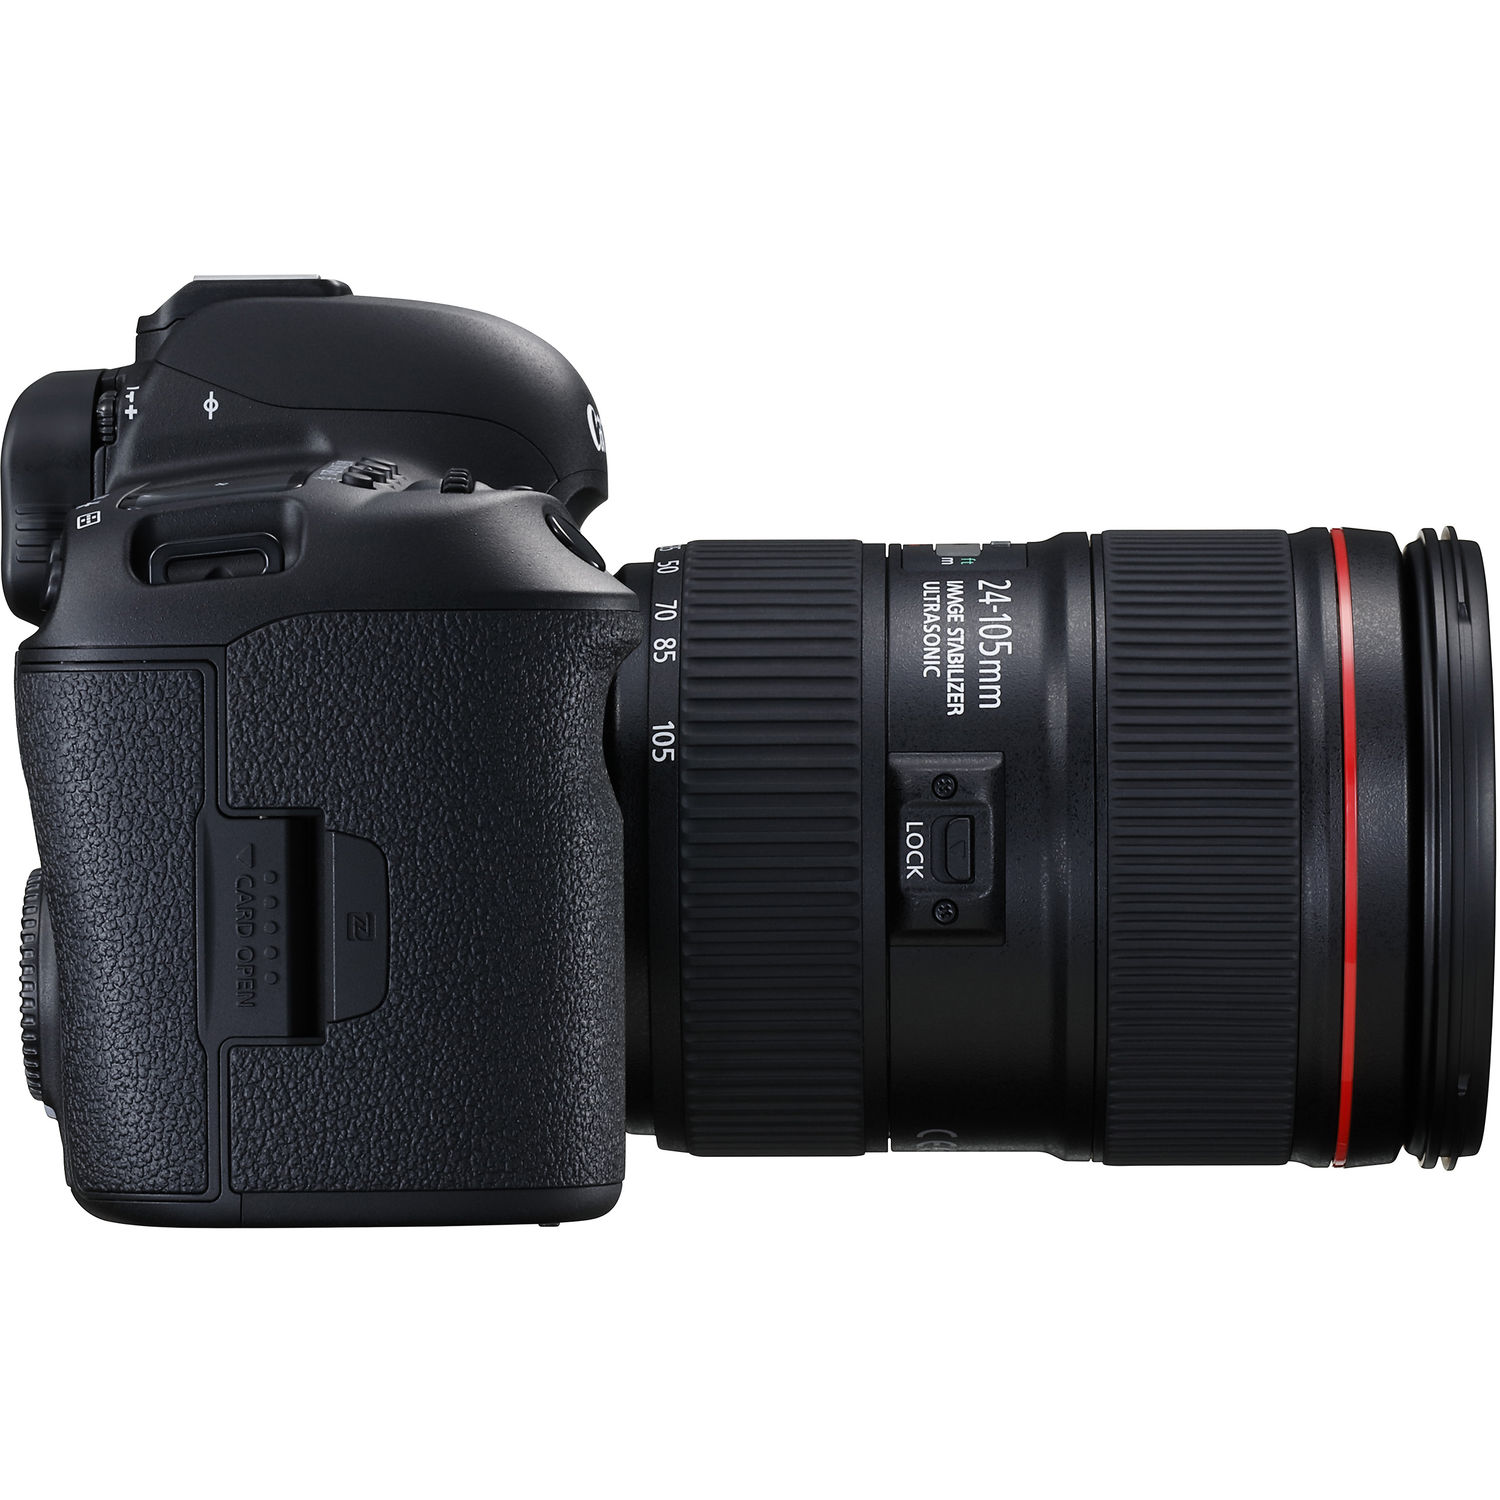 Canon EOS 5D Mark IV DSLR Camera with 24-105mm F/4L II Lens - image 4 of 4